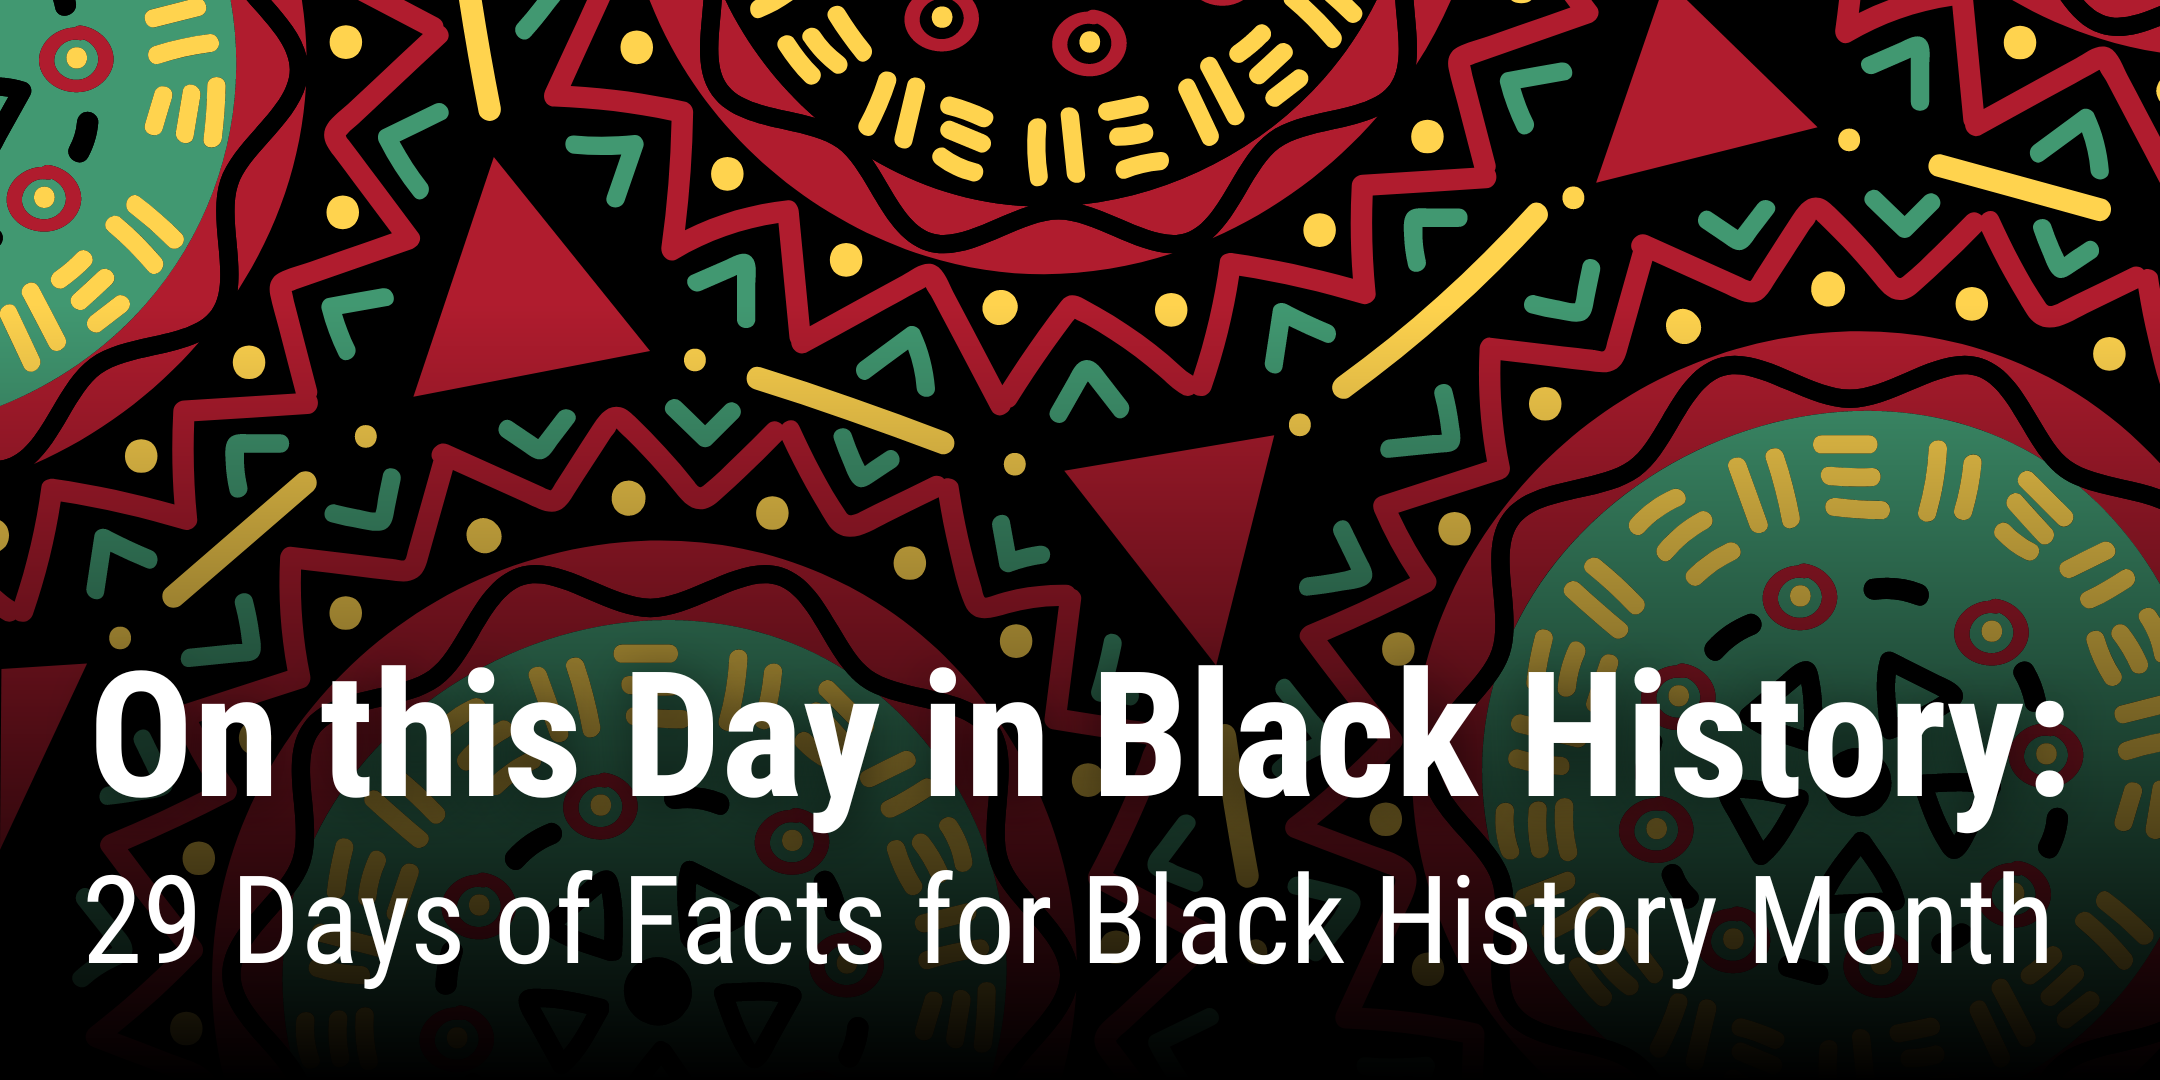 Colorful banner displaying blog title "On this Day in Black History: 29 Days of Facts for Black History Month"